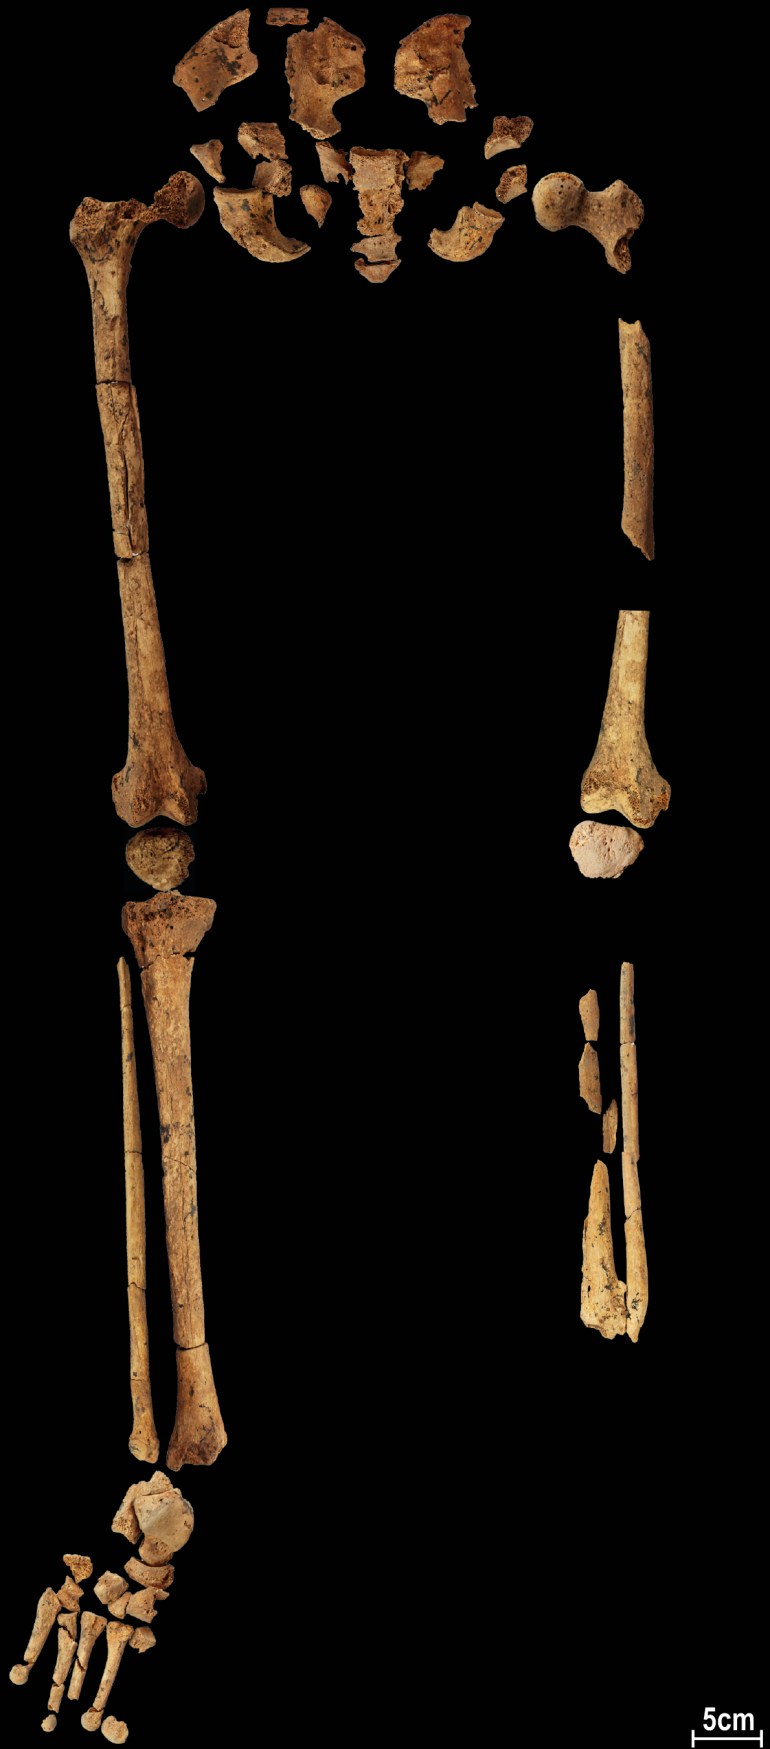 Borneo skeleton may show 31,000 year old amputation | Science and Technology News